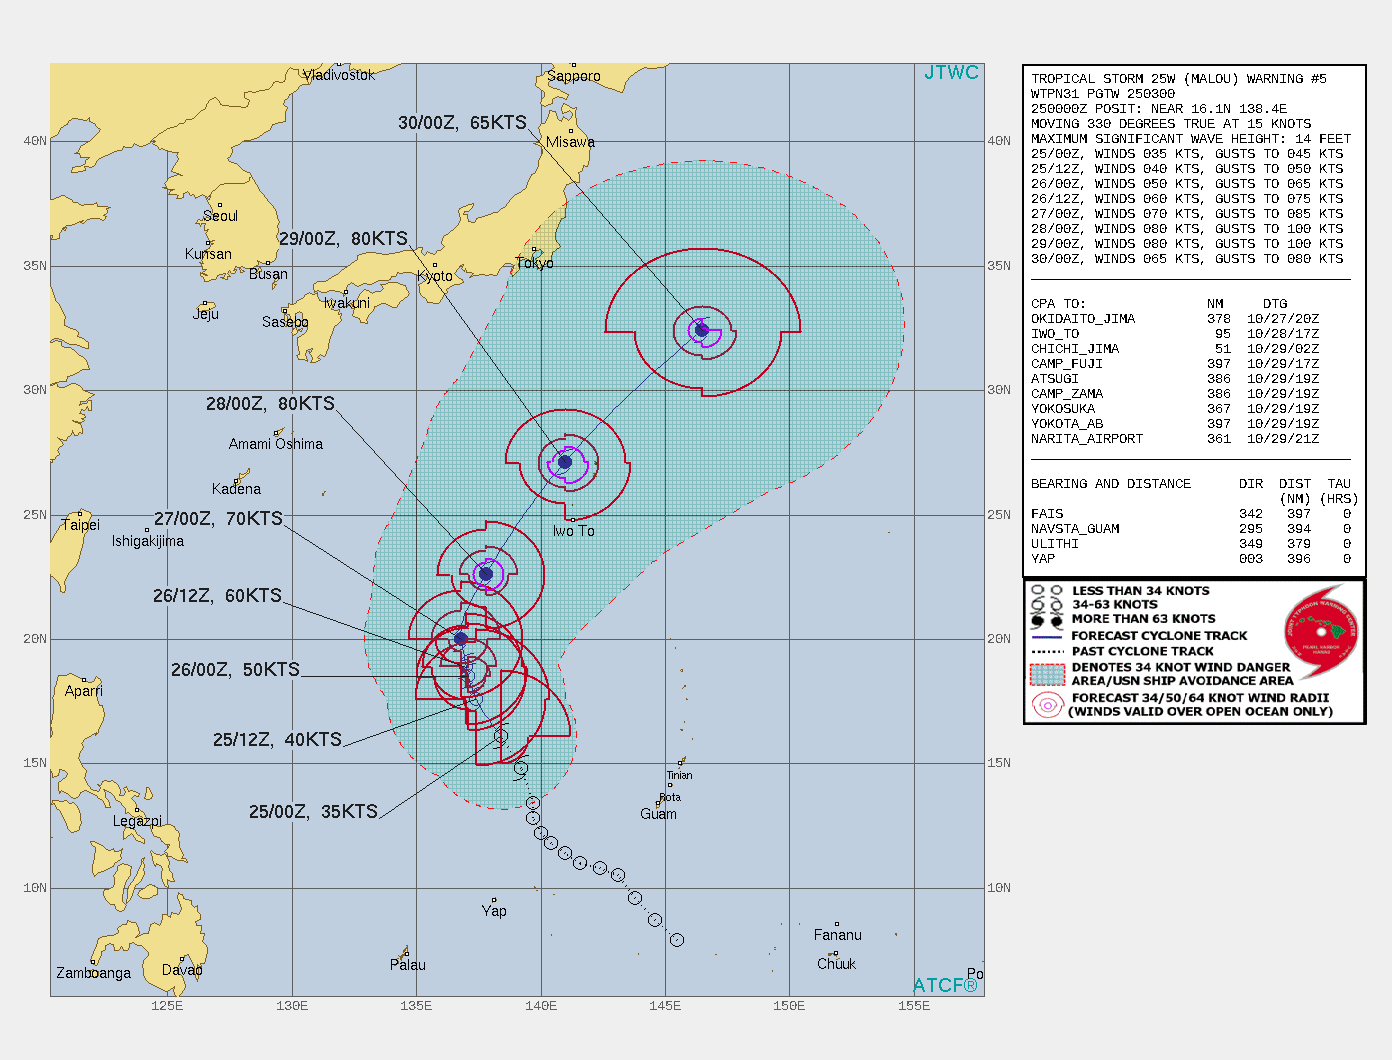 25W(MALOU) intensifying next 3 days/Tropical cyclone Formation alert for Invest 99W//17E(RICK) reaching CAT 2 and making landfall,25/06utc